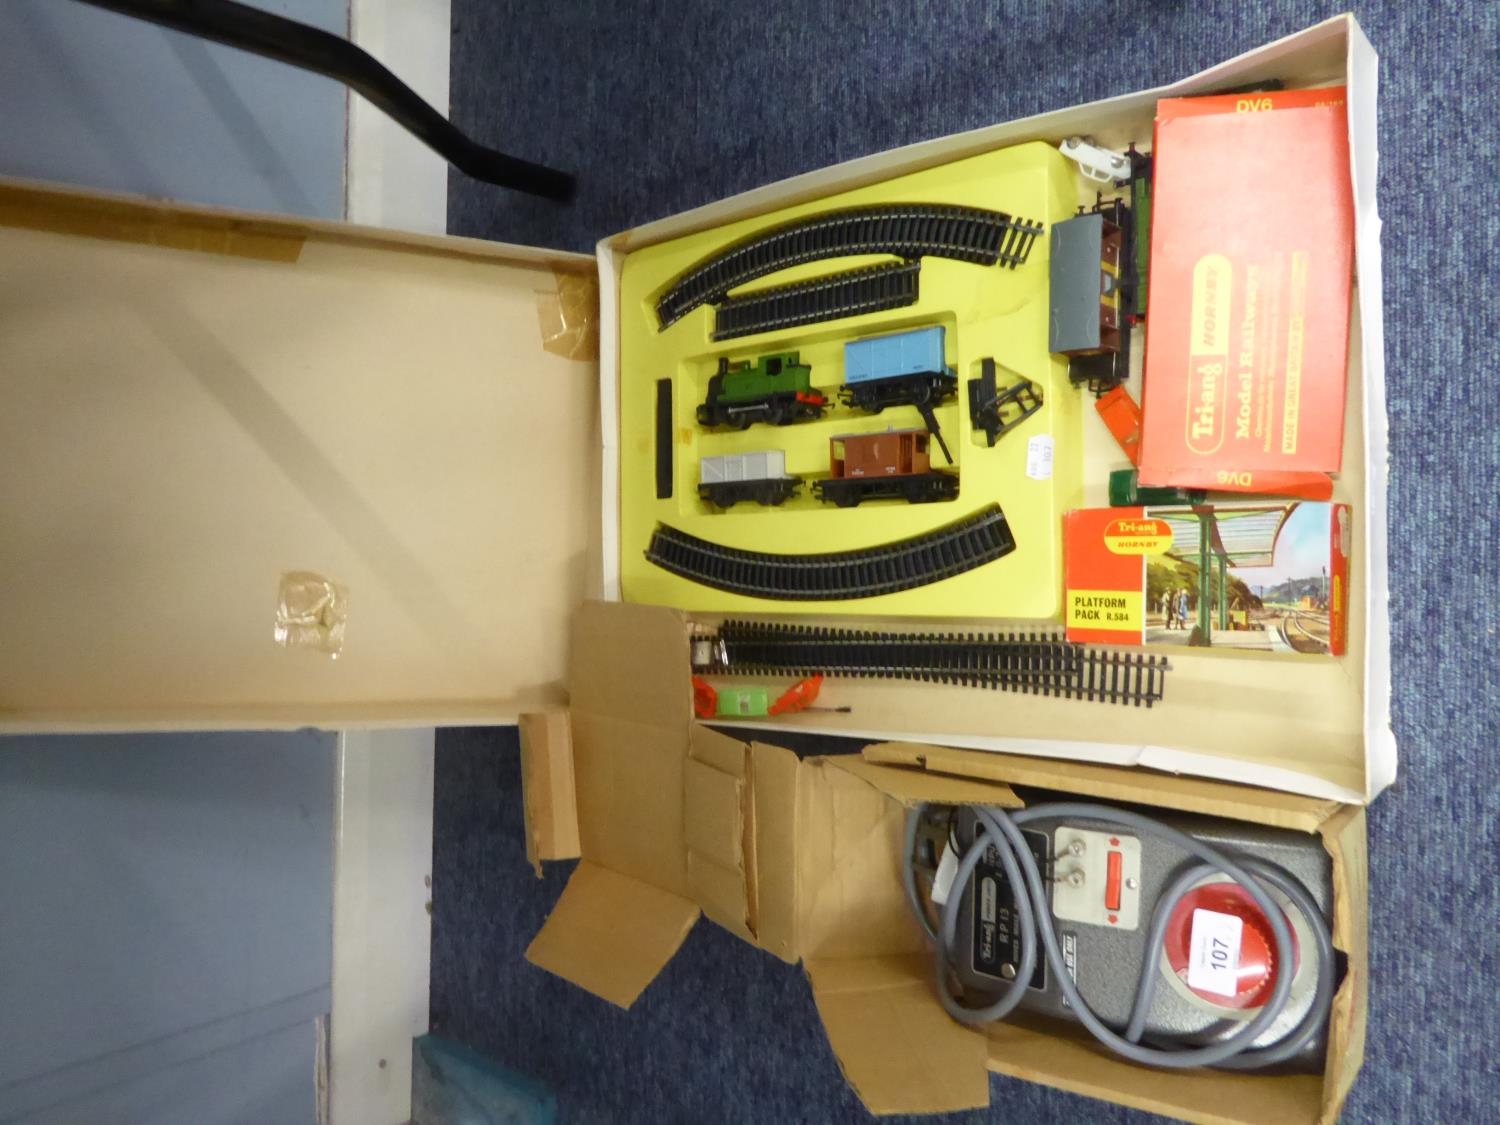 TRIANG HORNBY ELECTRIC 00 GAUGE PLASTIC MODEL TRAIN SET AND A TRIANG WESTMINSTER POWER CONTROLLER